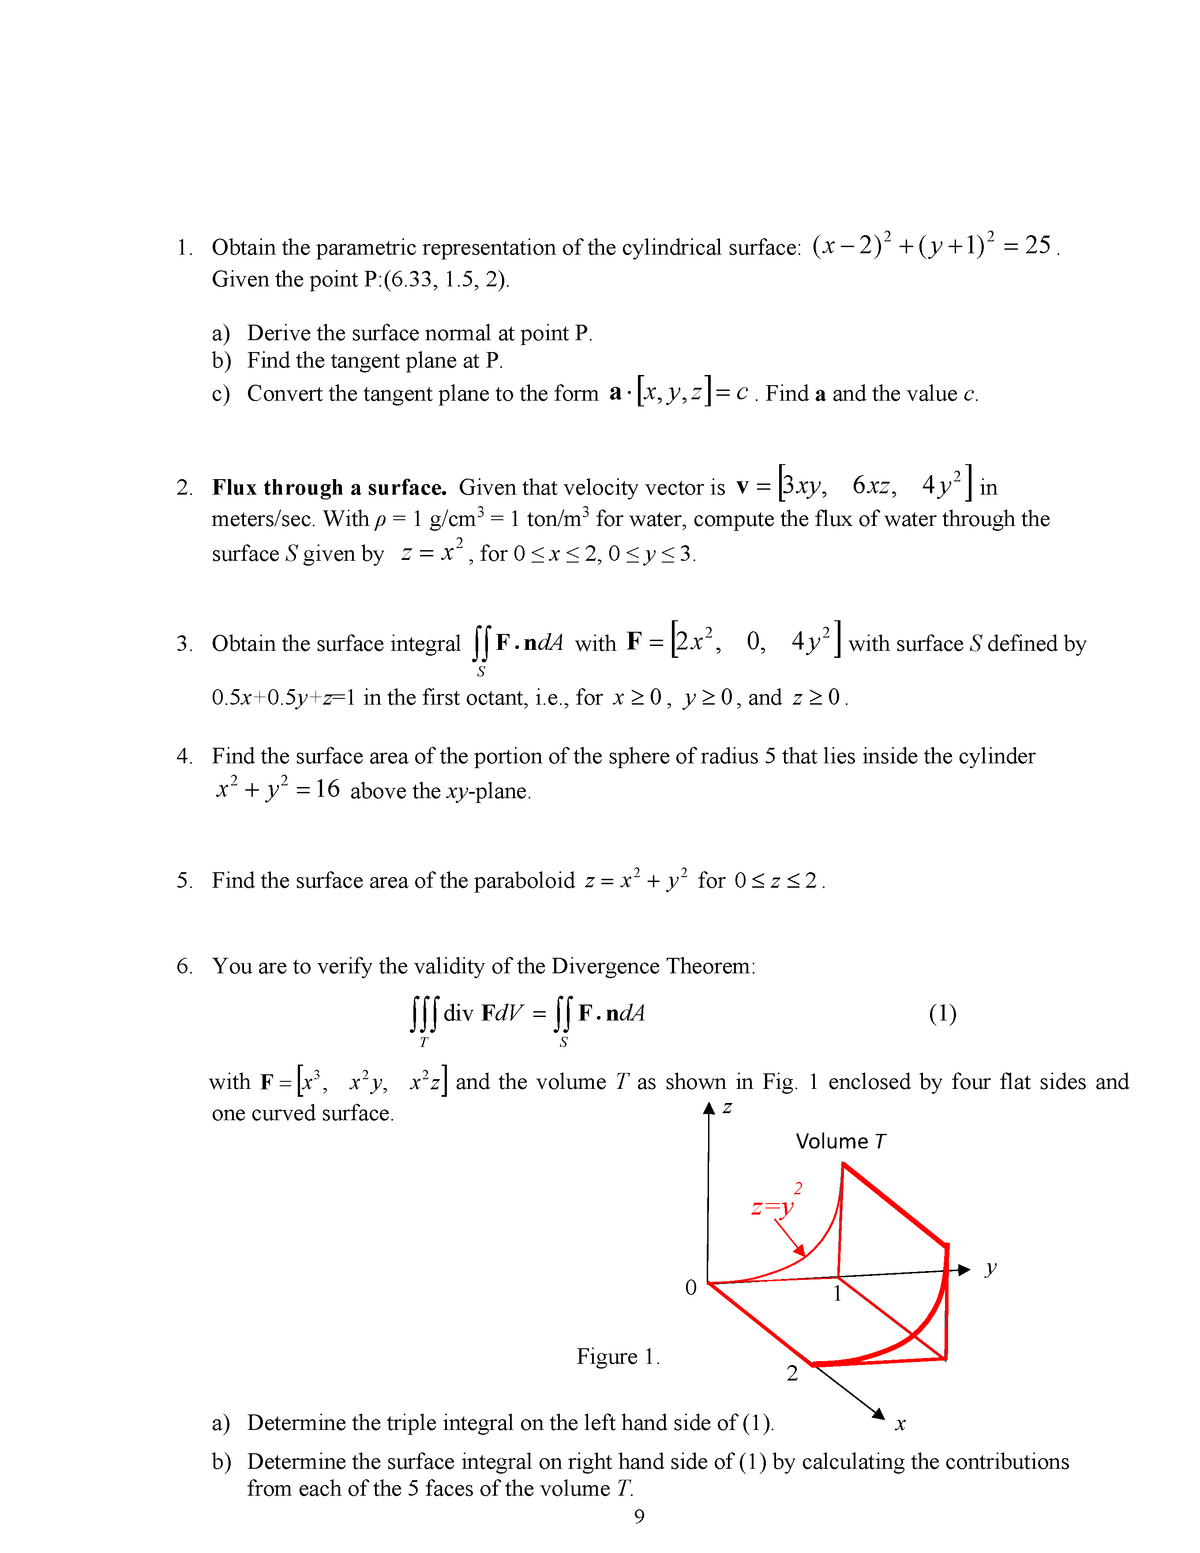 Exercise Of Surface Integral Engg1410c Linear Algebra And Vector Calculus Homework Assignment Due April 24 17 Obtain The Parametric Representation Of The Studocu